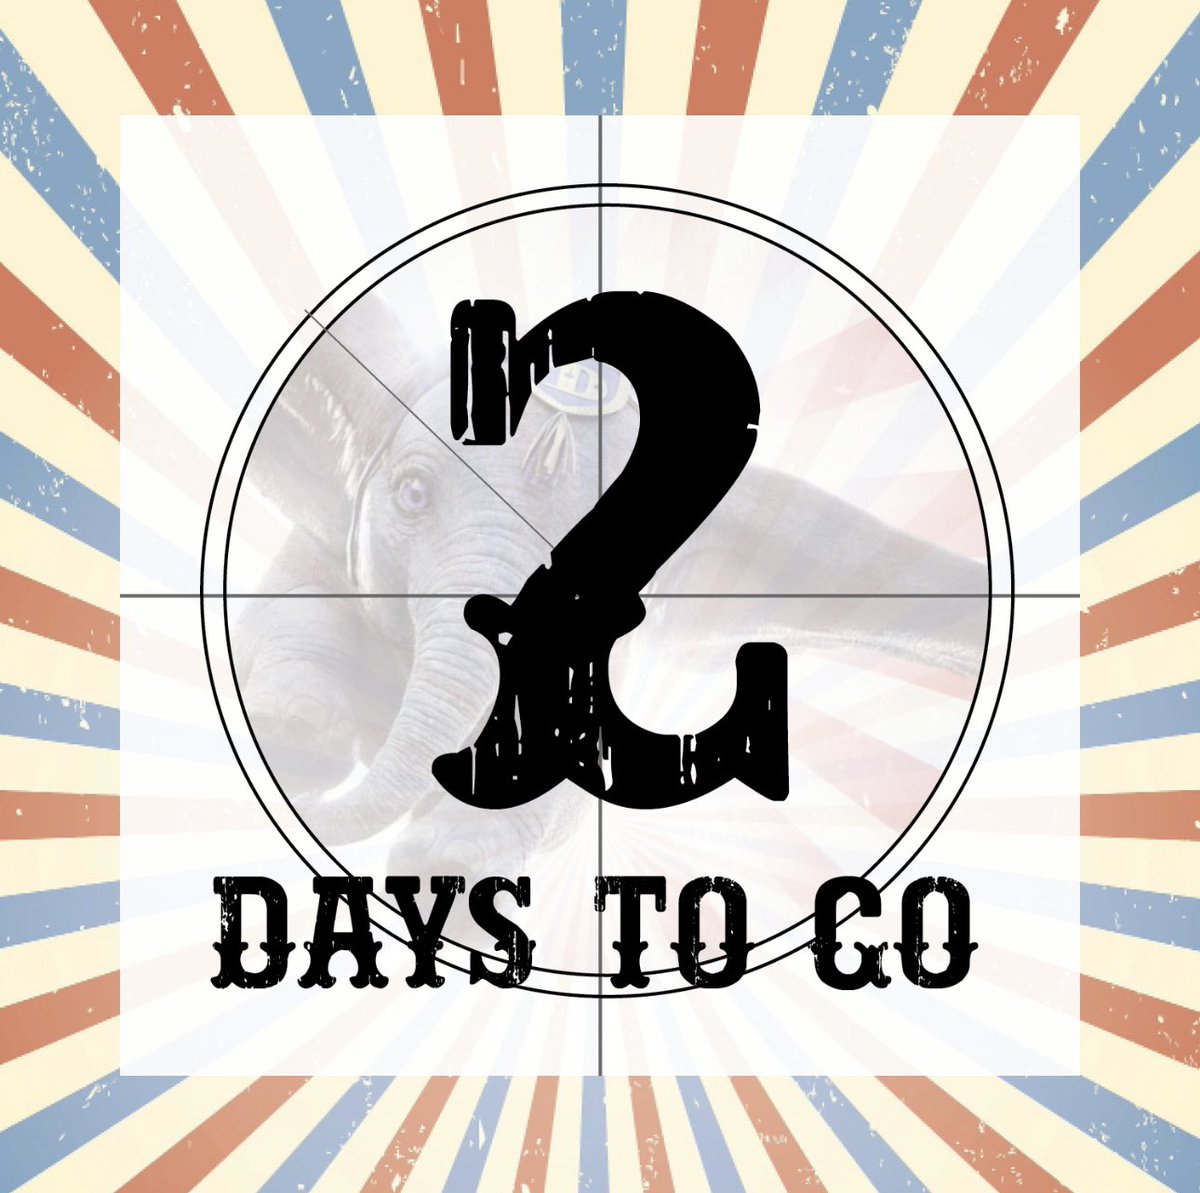 Only 2 more days until the big reveal! Stay tuned for our exciting announcement, you won’t want to miss it! #ComingSoon #ActiveTameside #Fuel4Fun #TamesideRocks #CommunityEvent #WhatsOnInTameside @TamesideCouncil @active_tameside